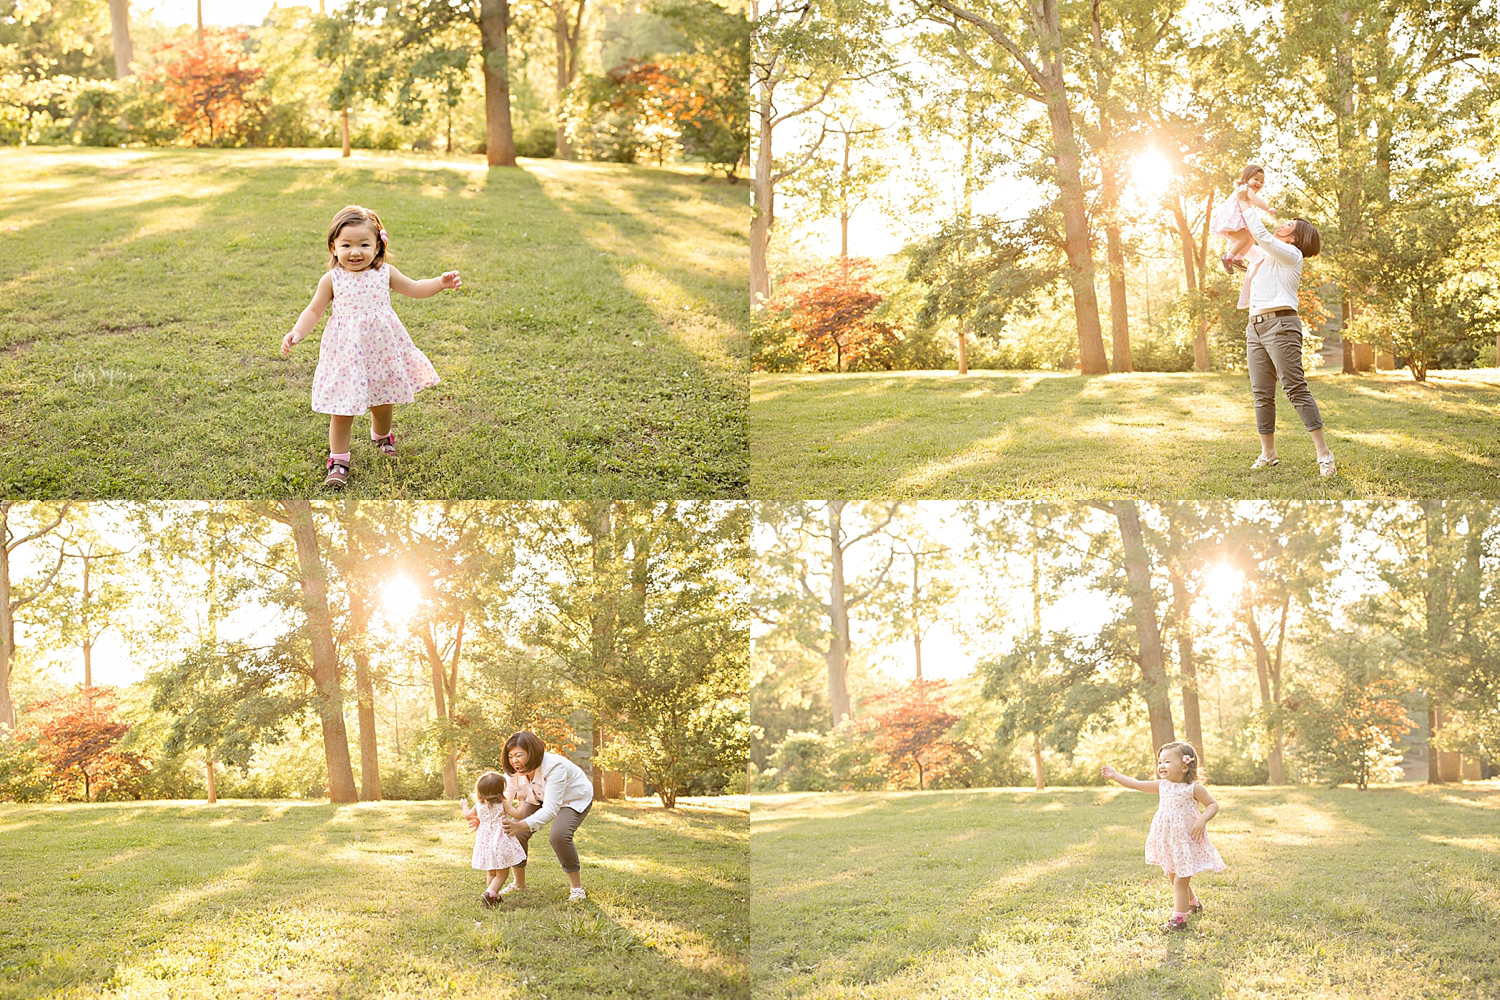  Image collage of a little, Asian, girl, running to her mother and getting tossed in the air.&nbsp; 